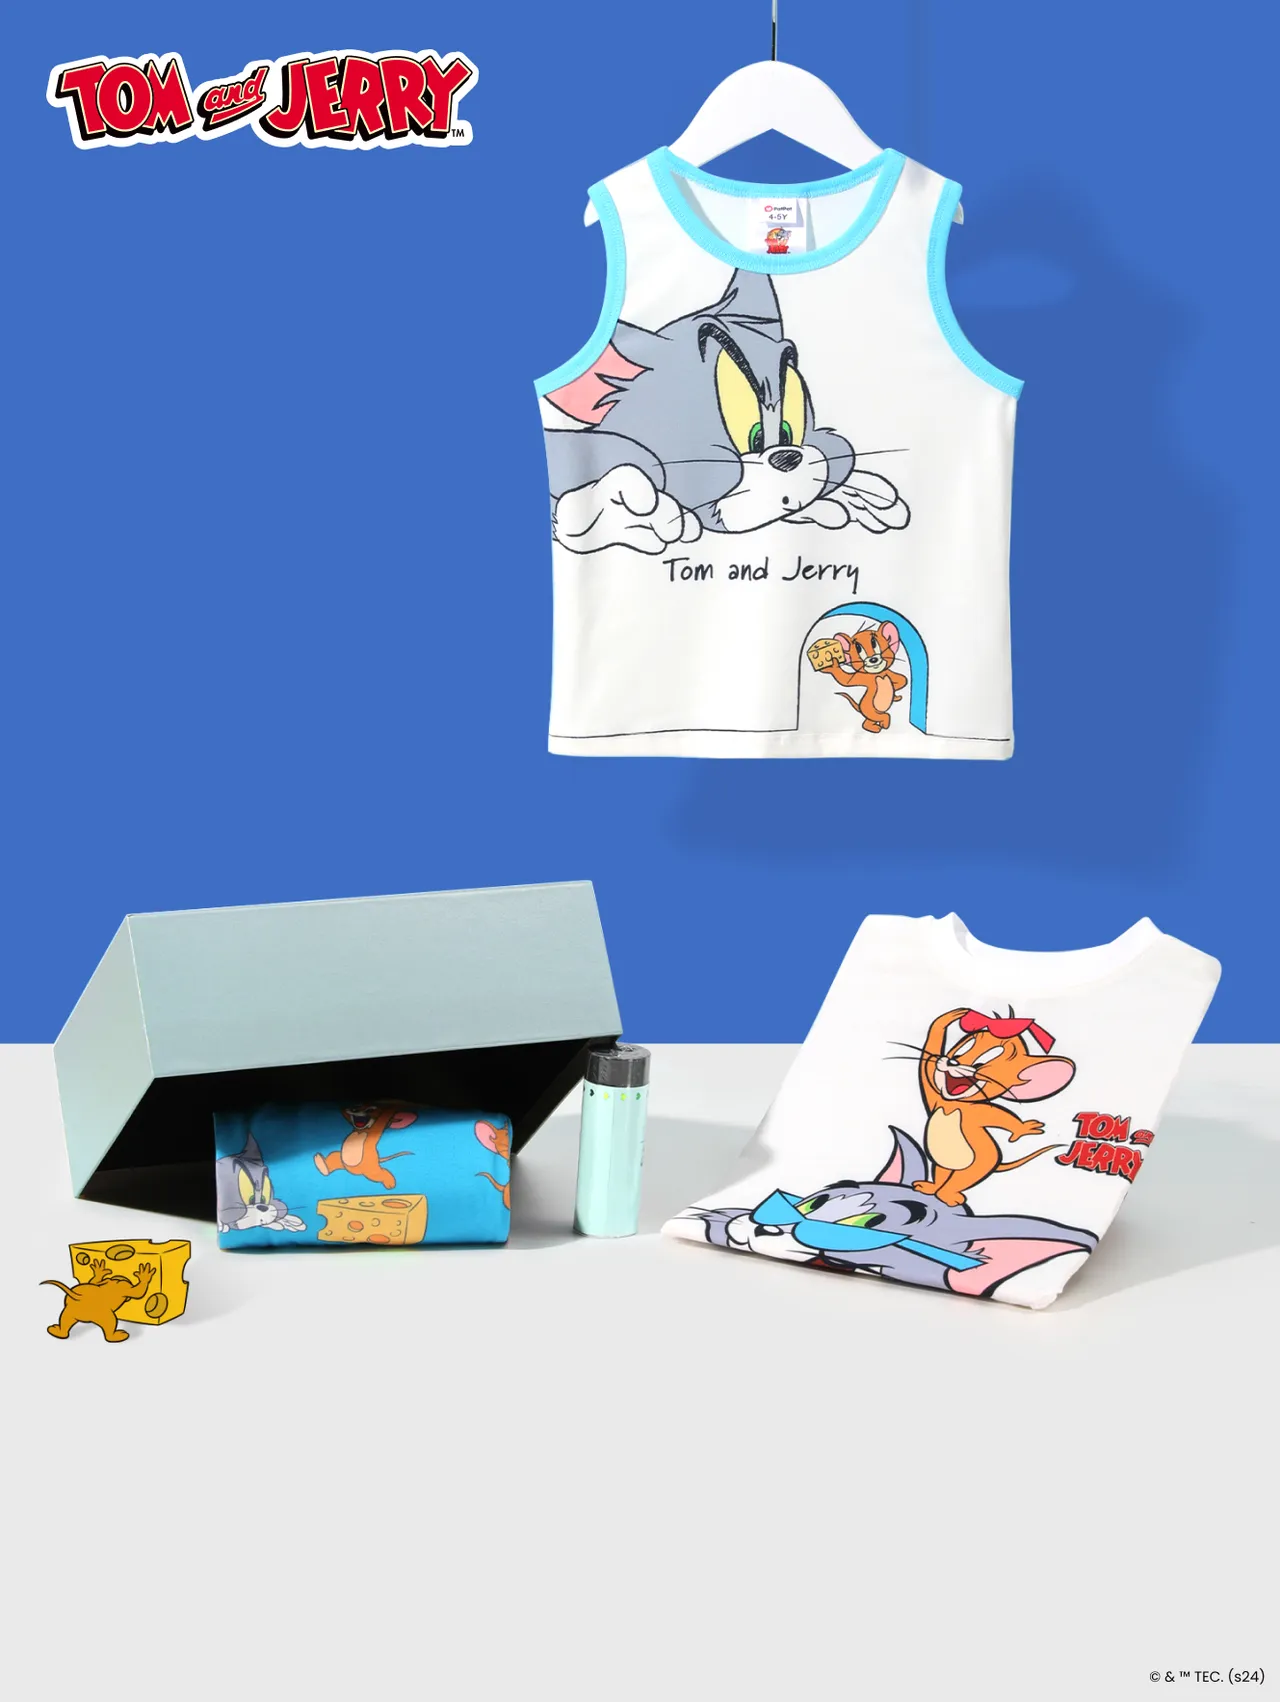 Click it to join Tom & Jerry Kids Play Wear activity